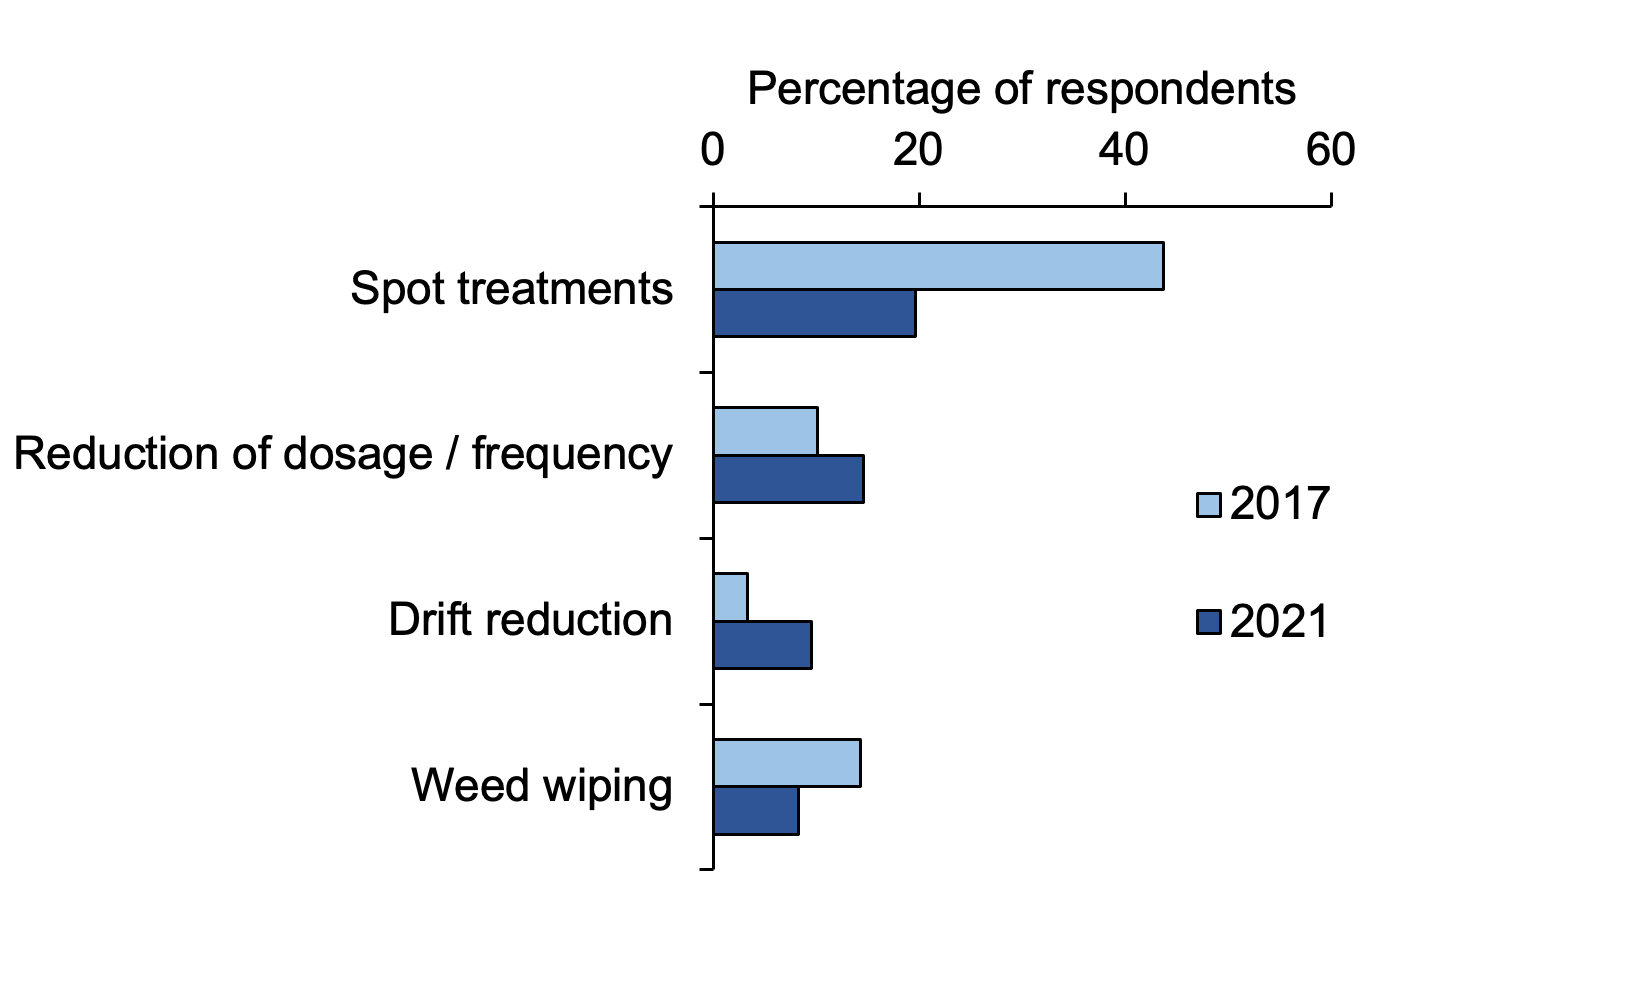 IPM: Bar chart of percentage responses to questions about targeted applications where spot treatments are most common method used in 2021.